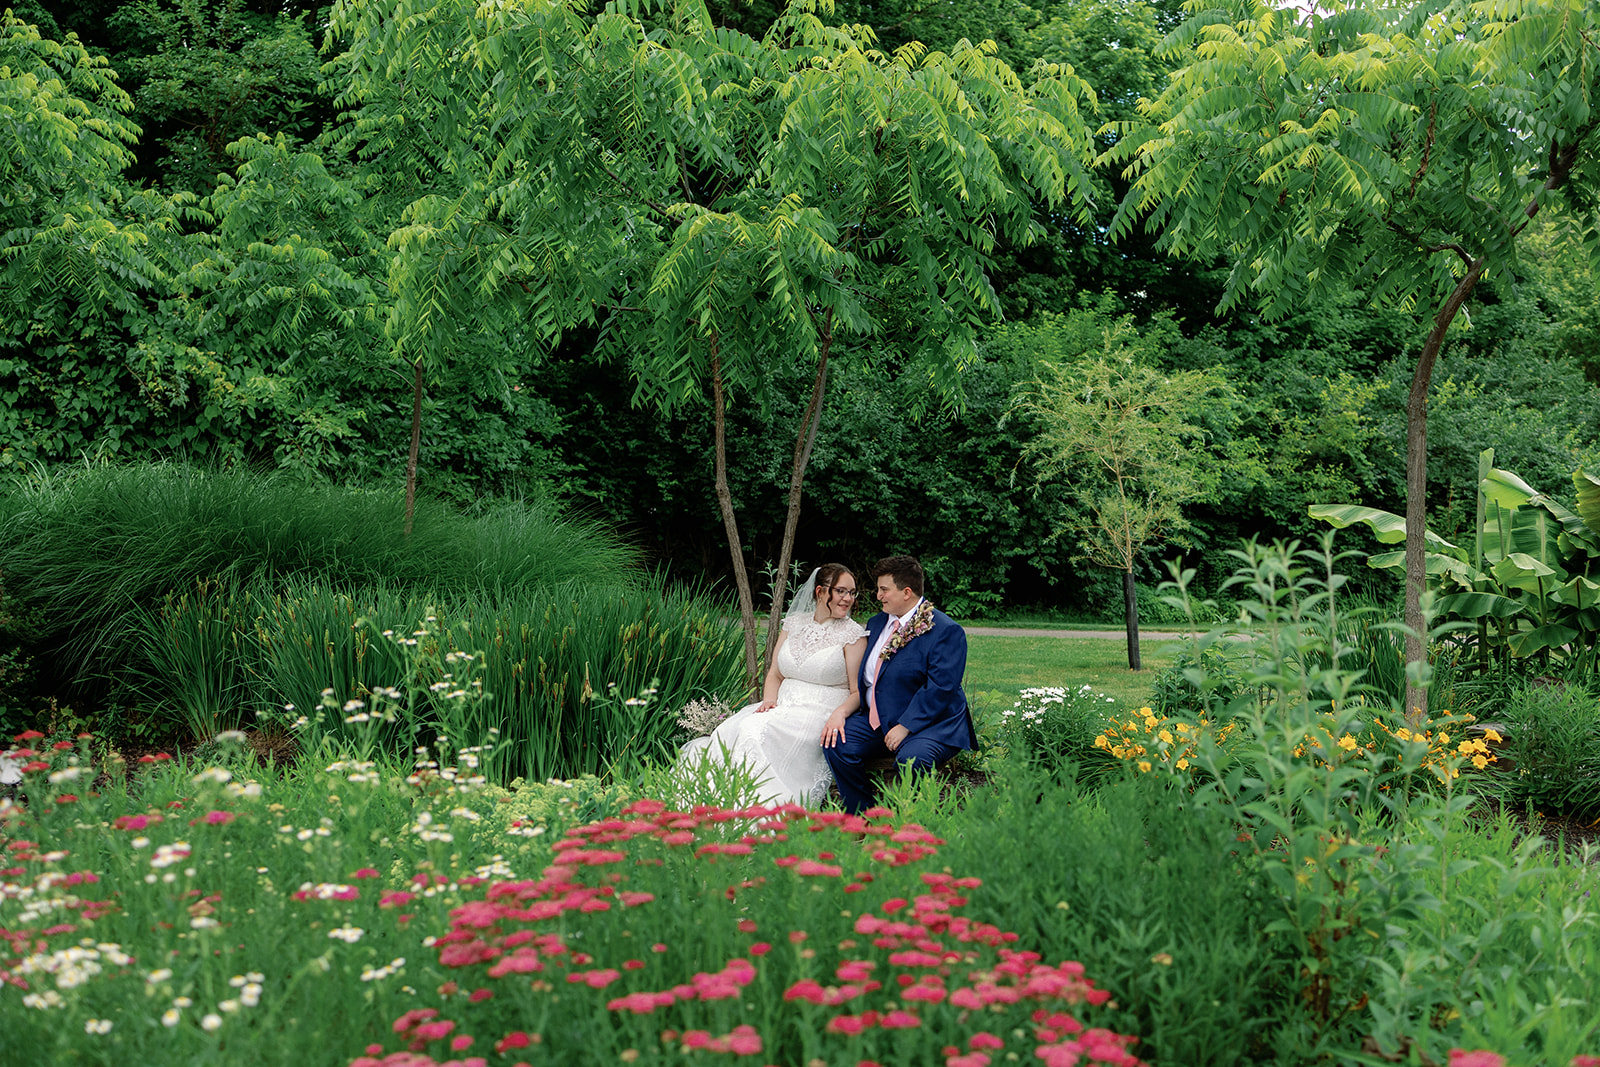 Two brides sitting on a bench in a colorful garden.